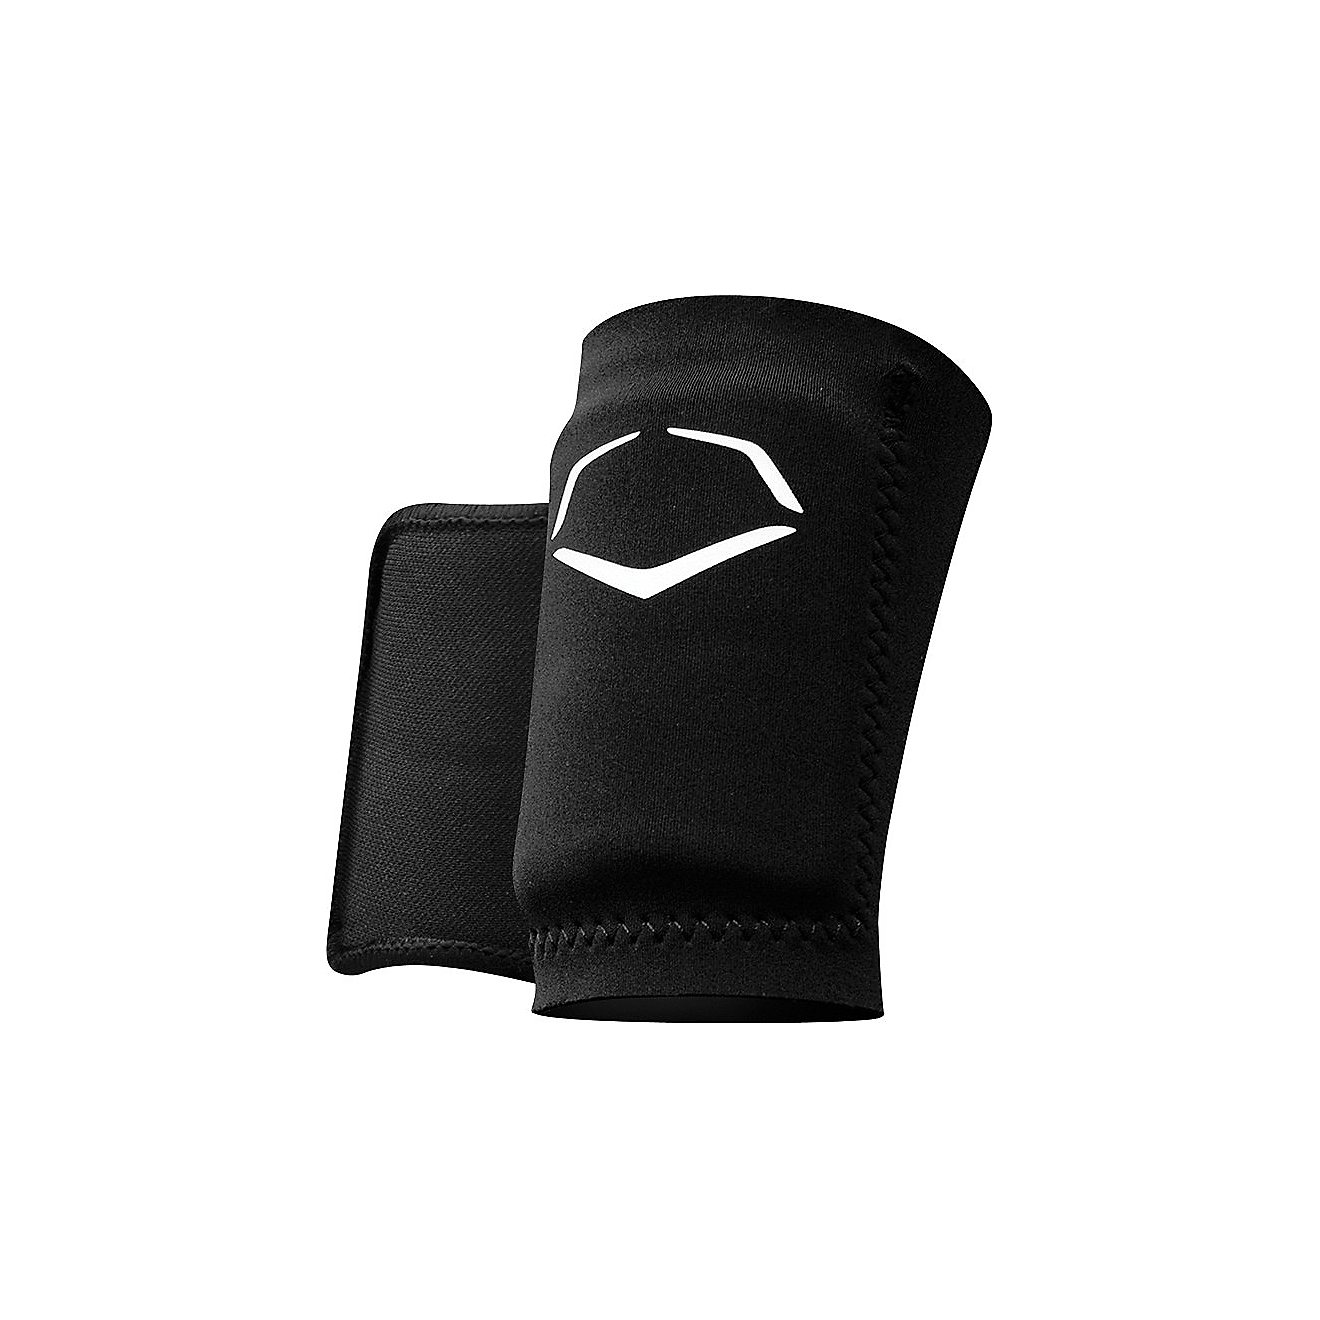 EvoShield Solid Protective Wrist Guard                                                                                           - view number 2